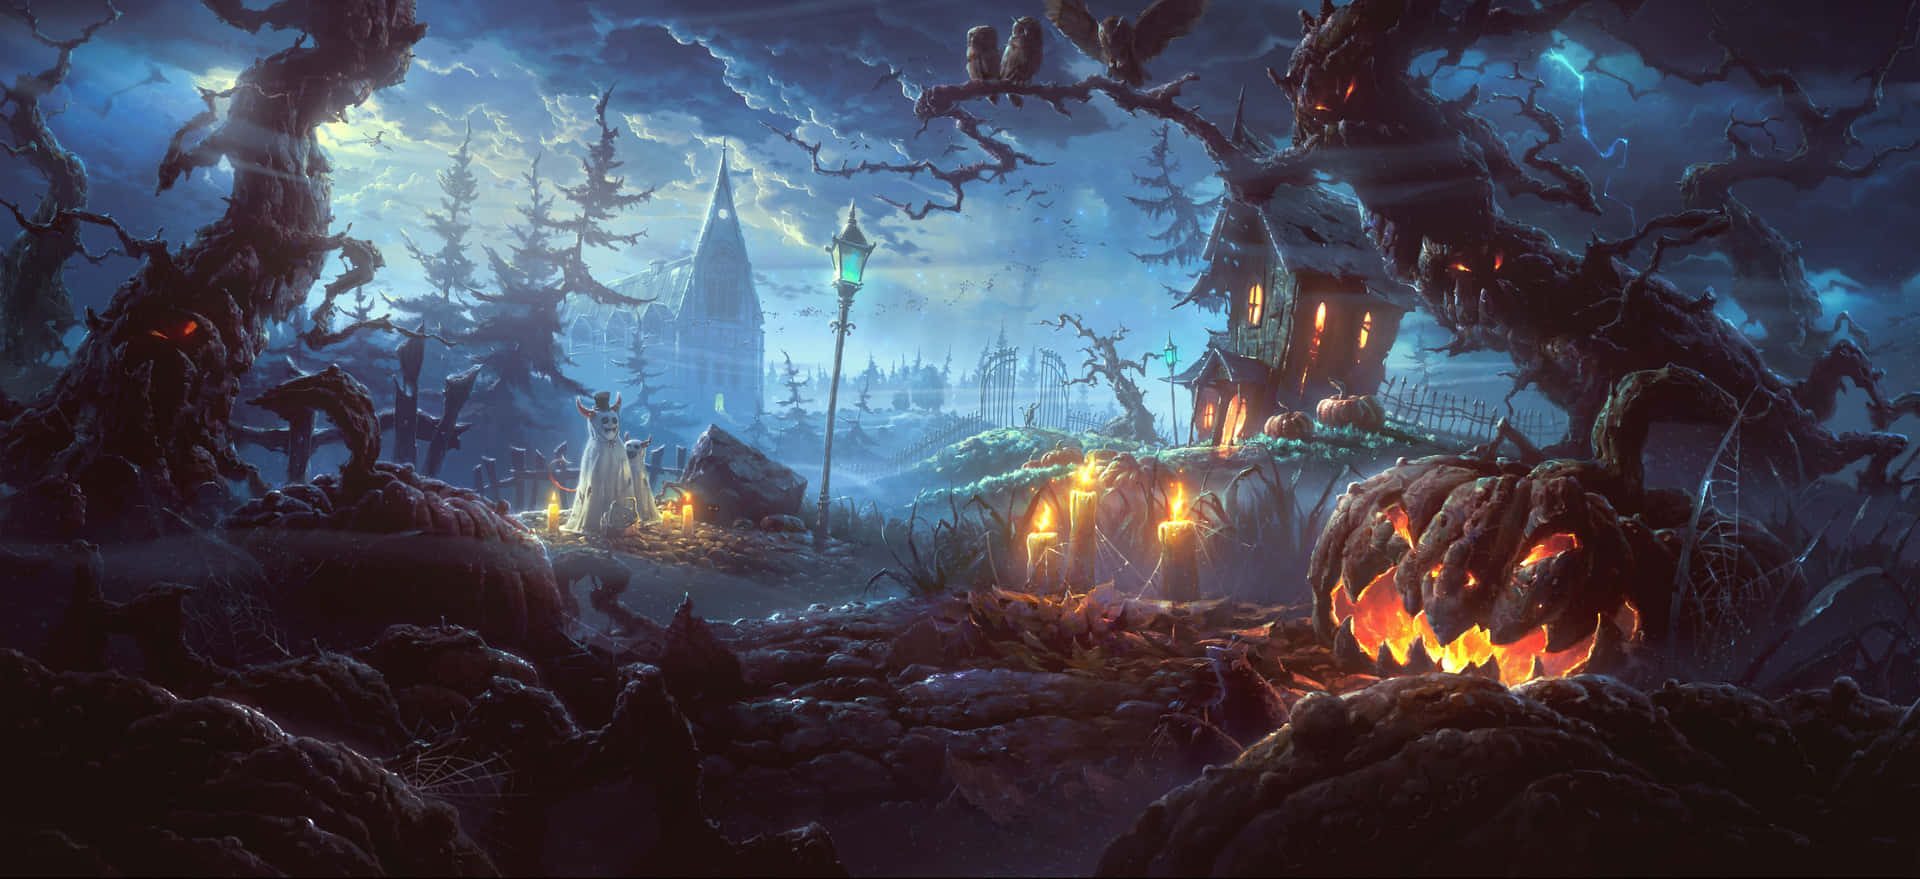 Experience thrills and chills this Halloween season with fun and spooky games Wallpaper